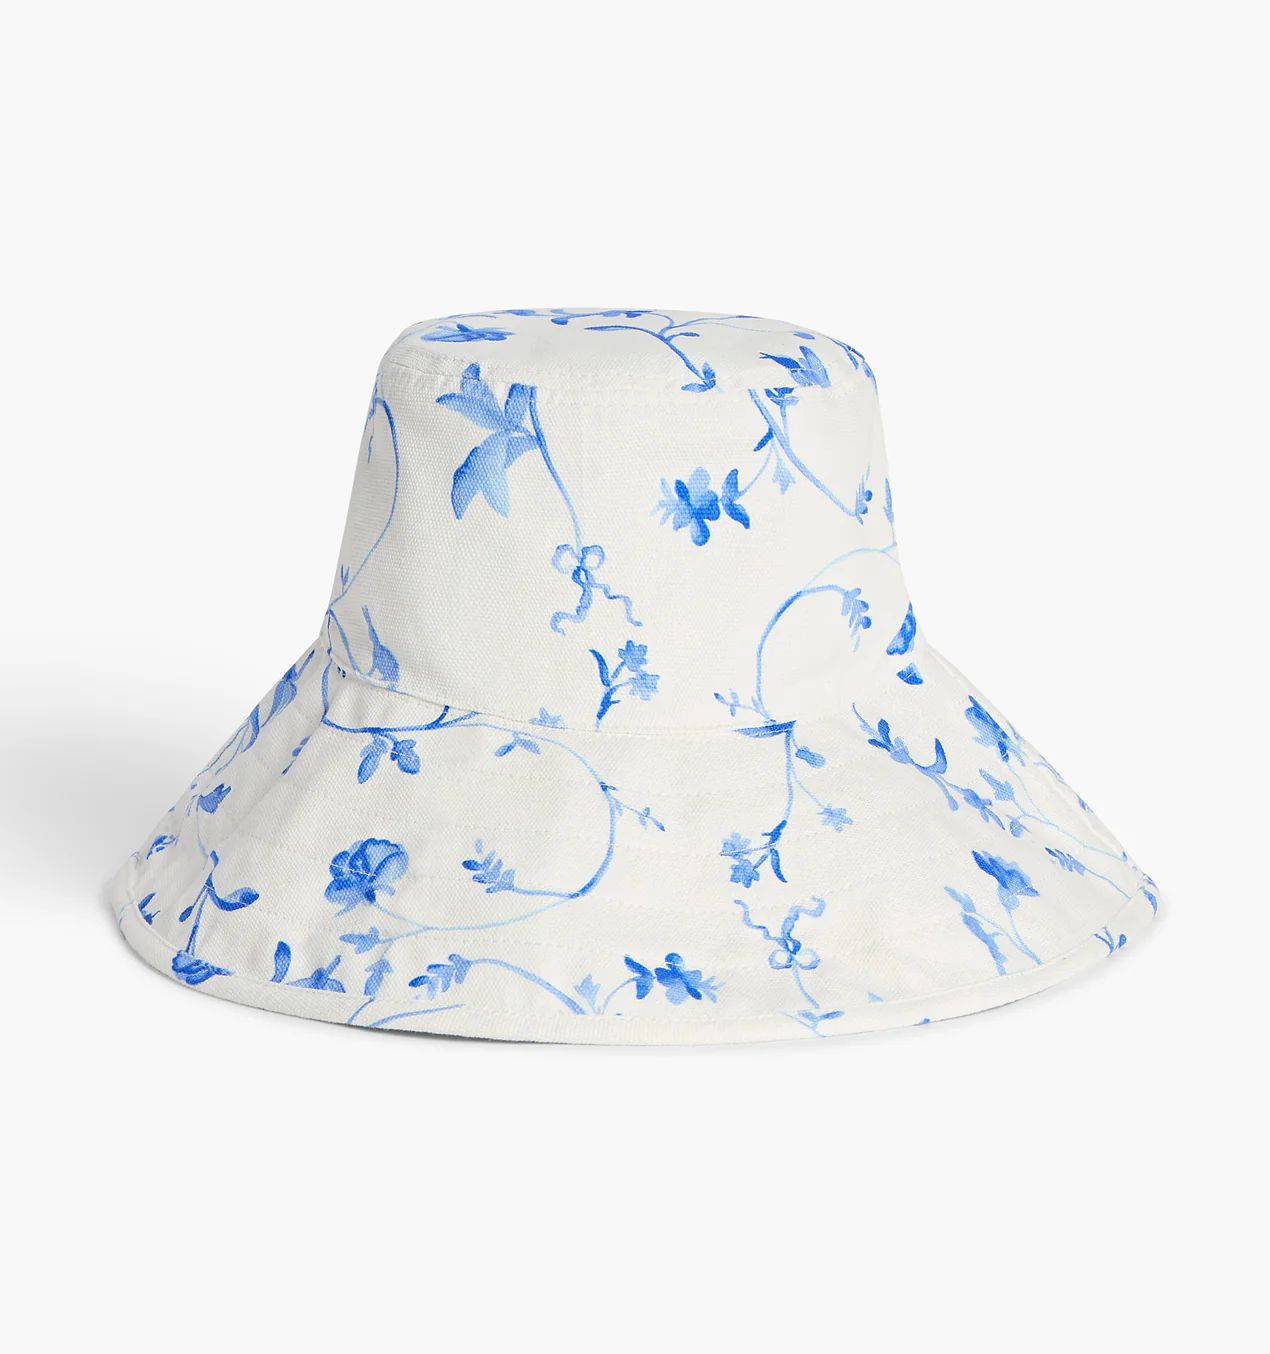 The Sun Hat - Strawberry Daiquiri Sherwood Forest | Hill House Home